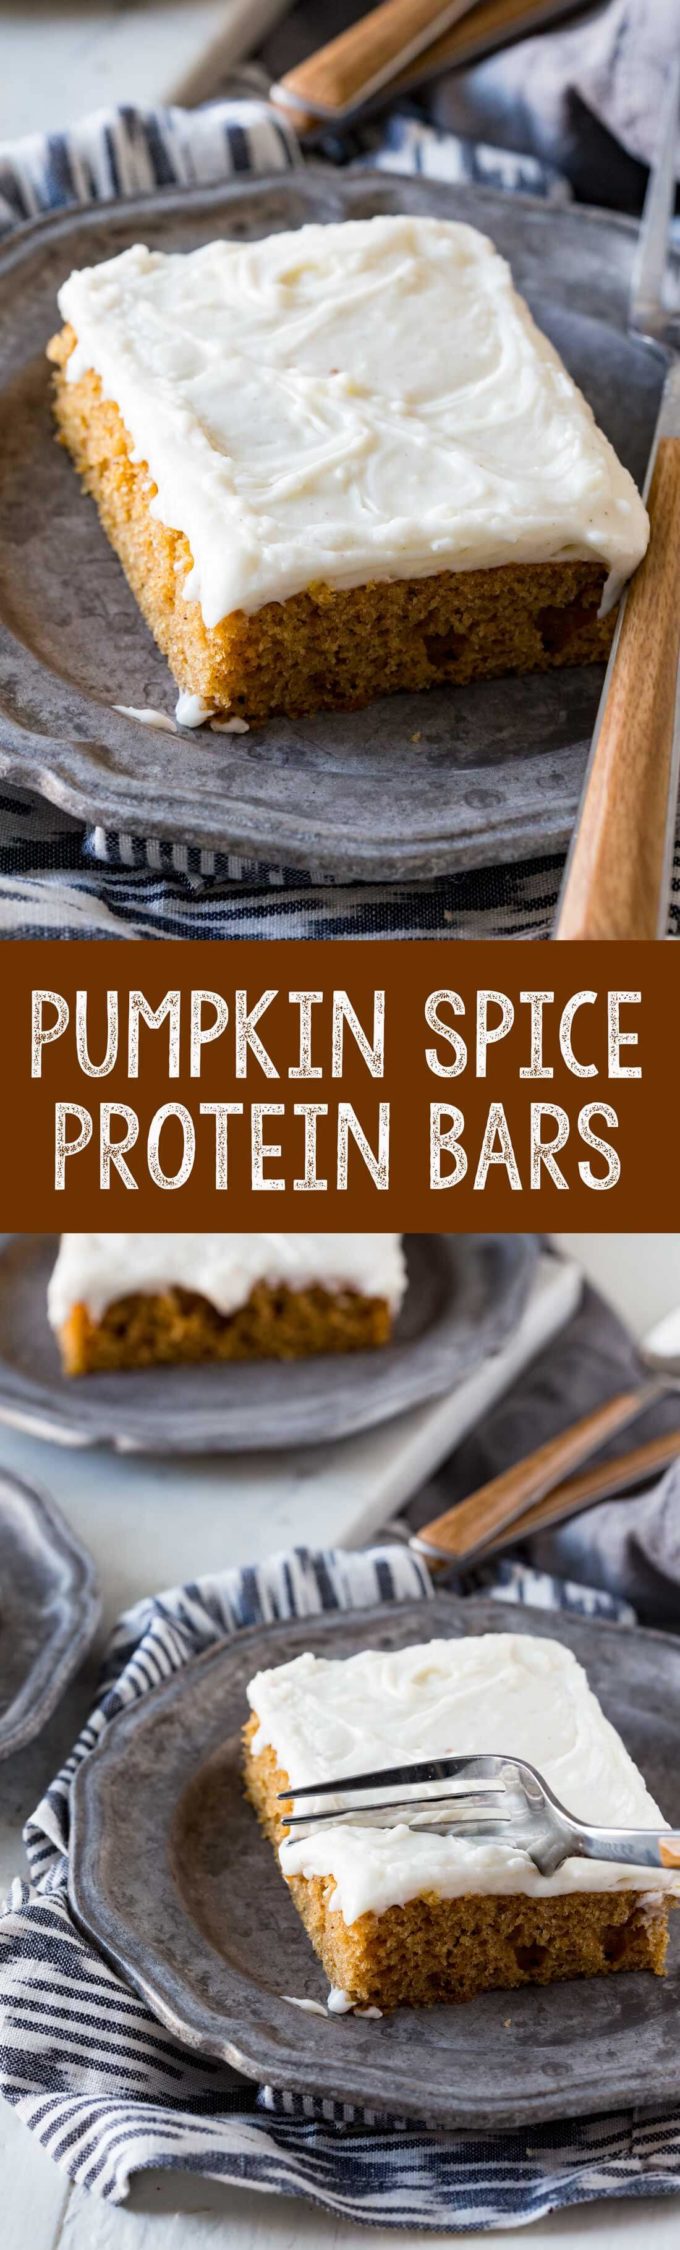 Pumpkin Spice Protein Bars are a fun holiday treat with a healthier protein twist. 